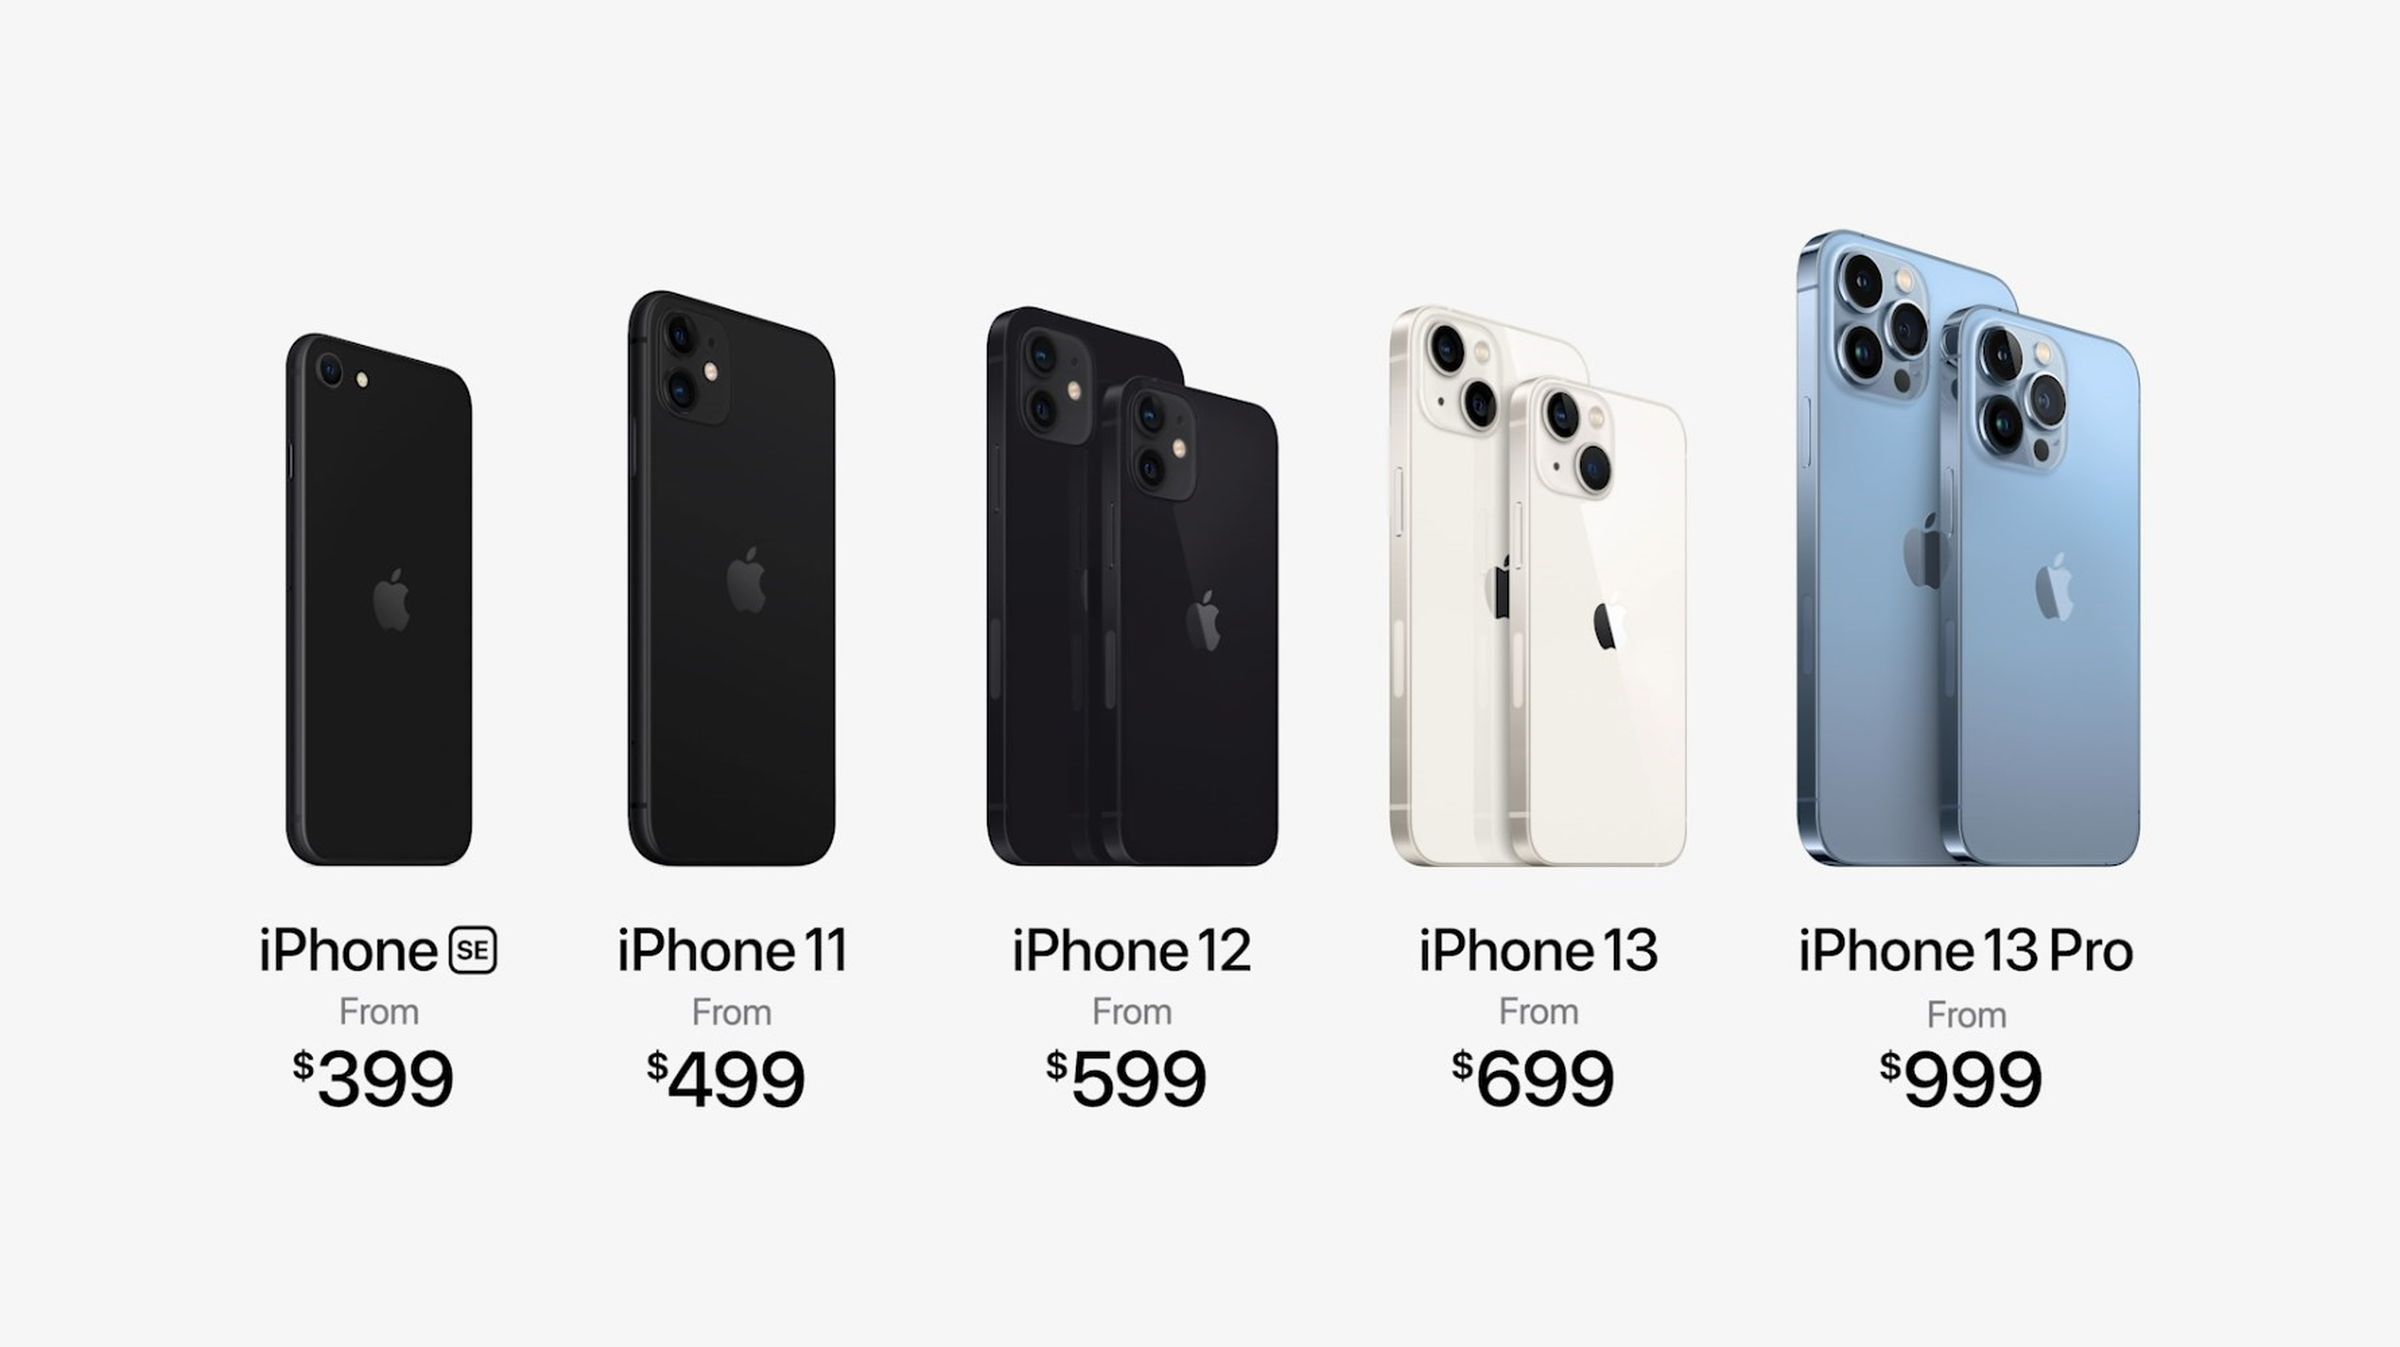 Apple’s pricing for the new iPhone 13 models isn’t out of the ordinary — but few people will actually pay that.